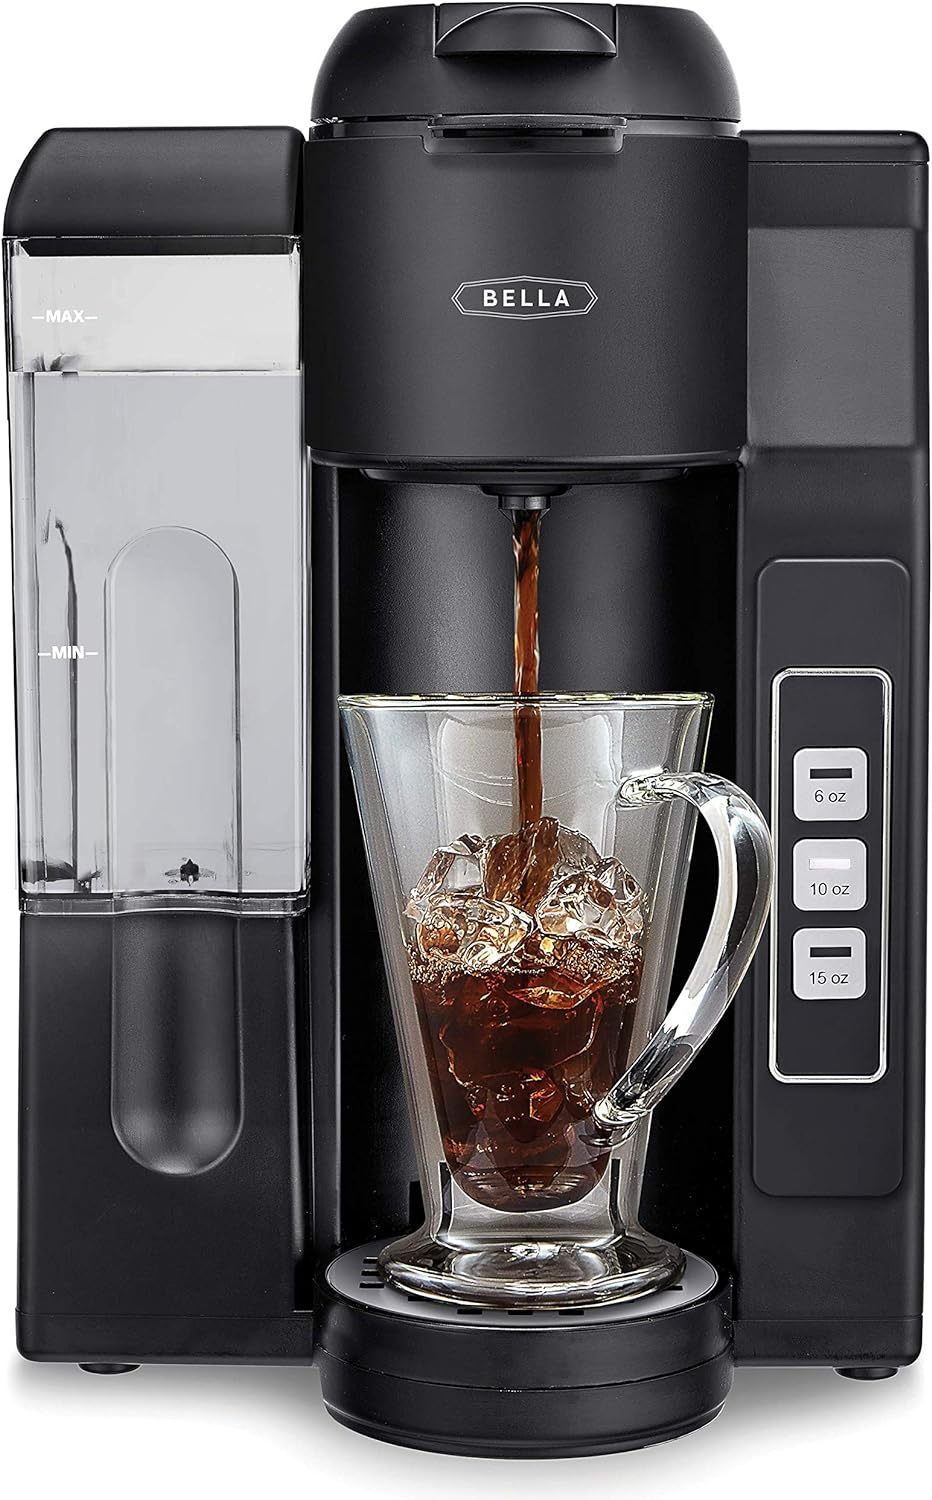 BELLA Single Serve Coffee Maker, Dual Brew, K-cup Compatible - Ground Coffee Brewer with Removable Water Tank  Adjustable Drip Tray, Perfect for Travel